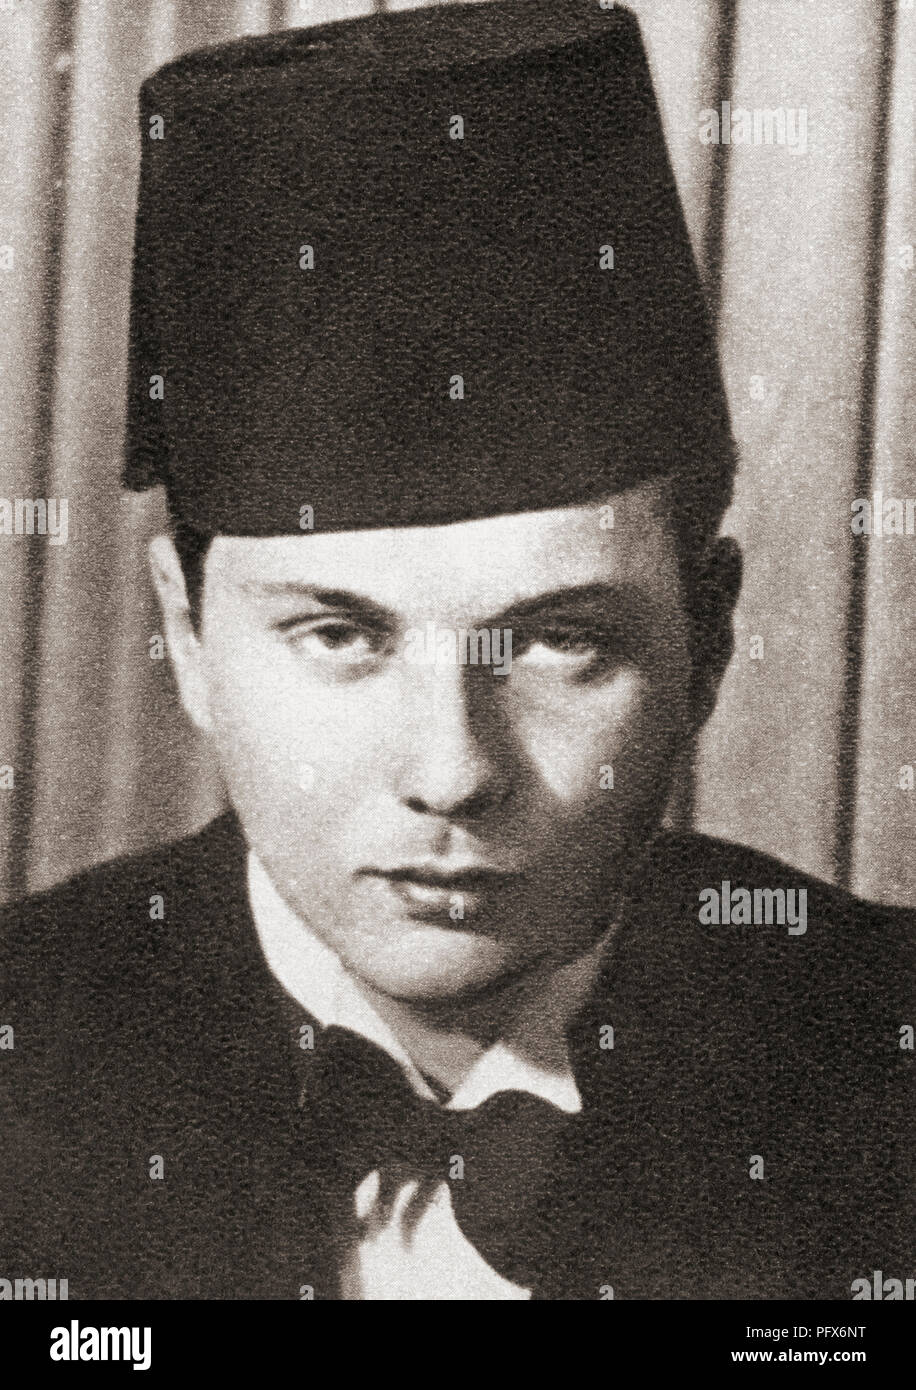 Farouk I ,1920 – 1965.  Tenth ruler of Egypt from the Muhammad Ali dynasty and the penultimate King of Egypt and the Sudan, seen here in 1936 aged 16 when he succeeded to the throne on the death of his father. From These Tremendous Years, published 1938. Stock Photo